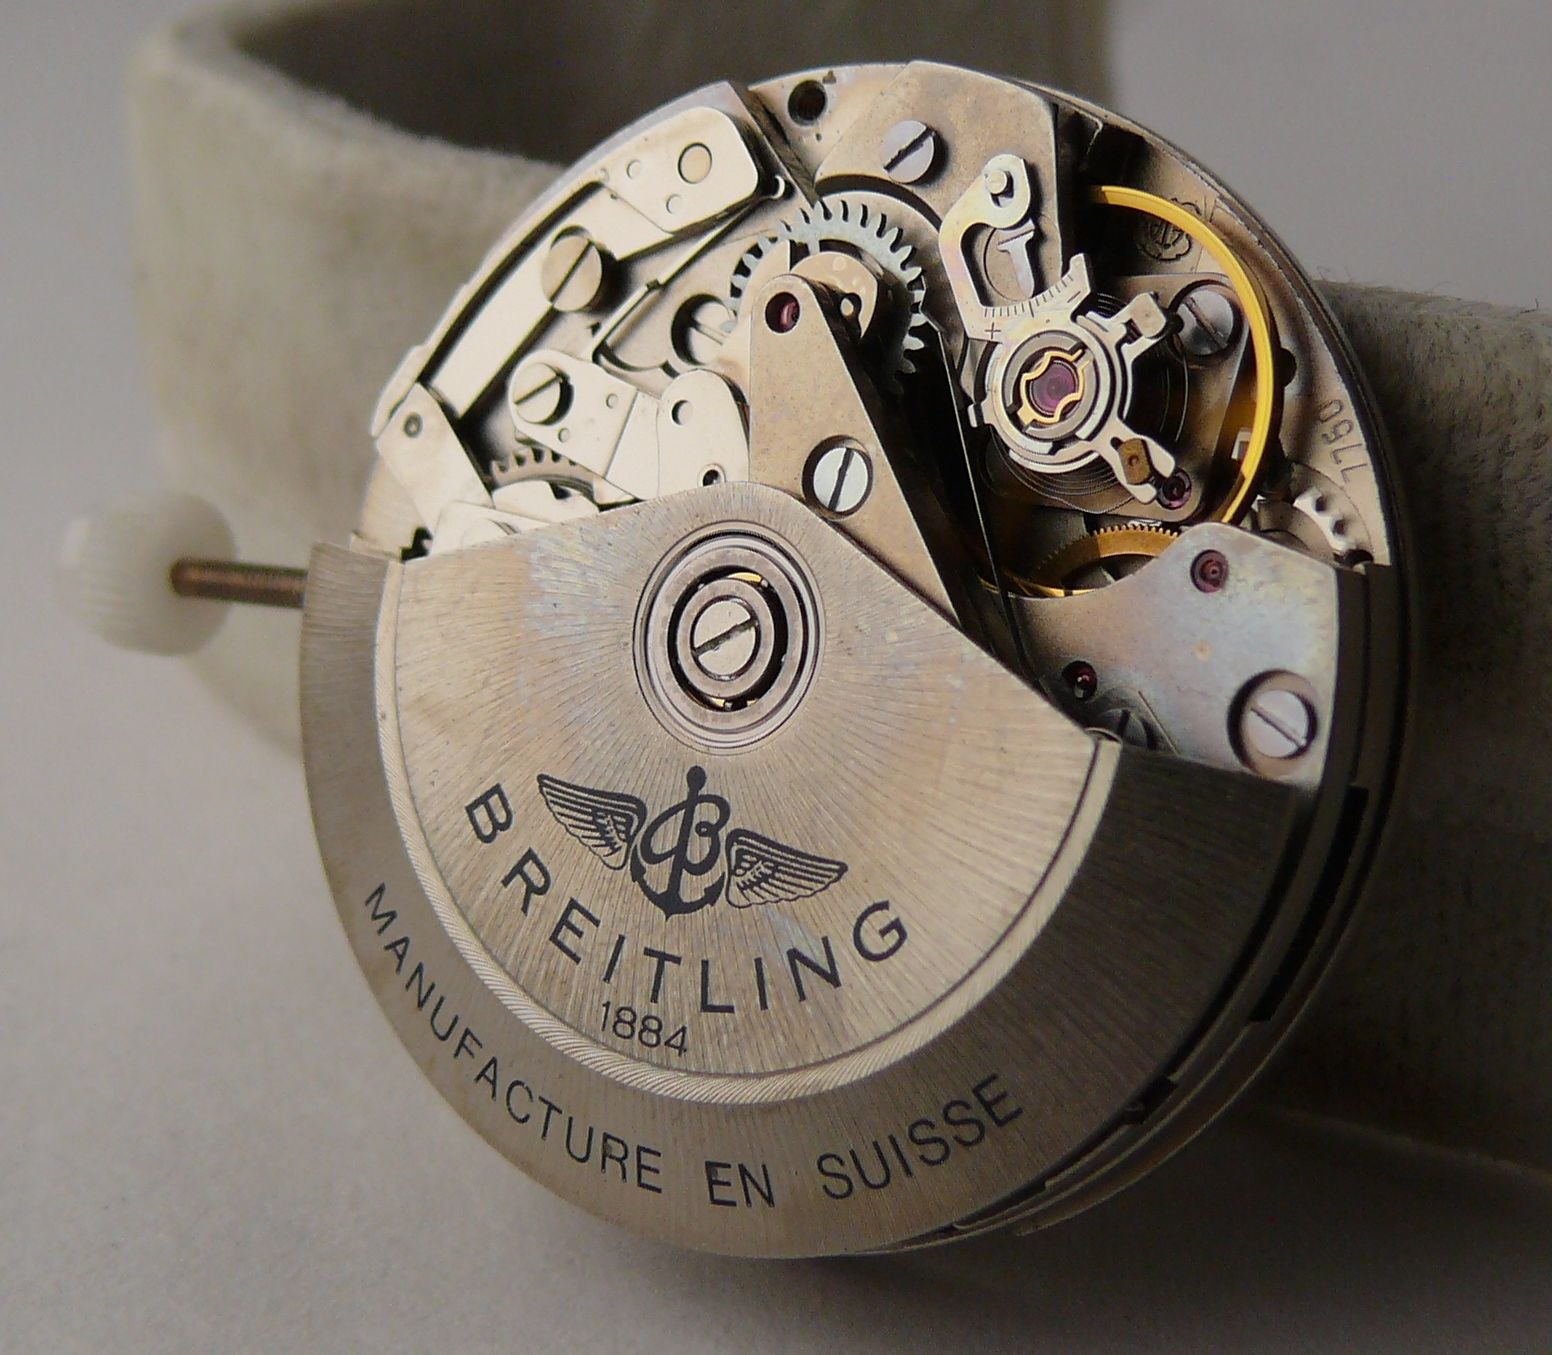 Vintage Breitling Chronograph Valjoux 7750 Movement. Although recent service history is unknown, - Image 4 of 4